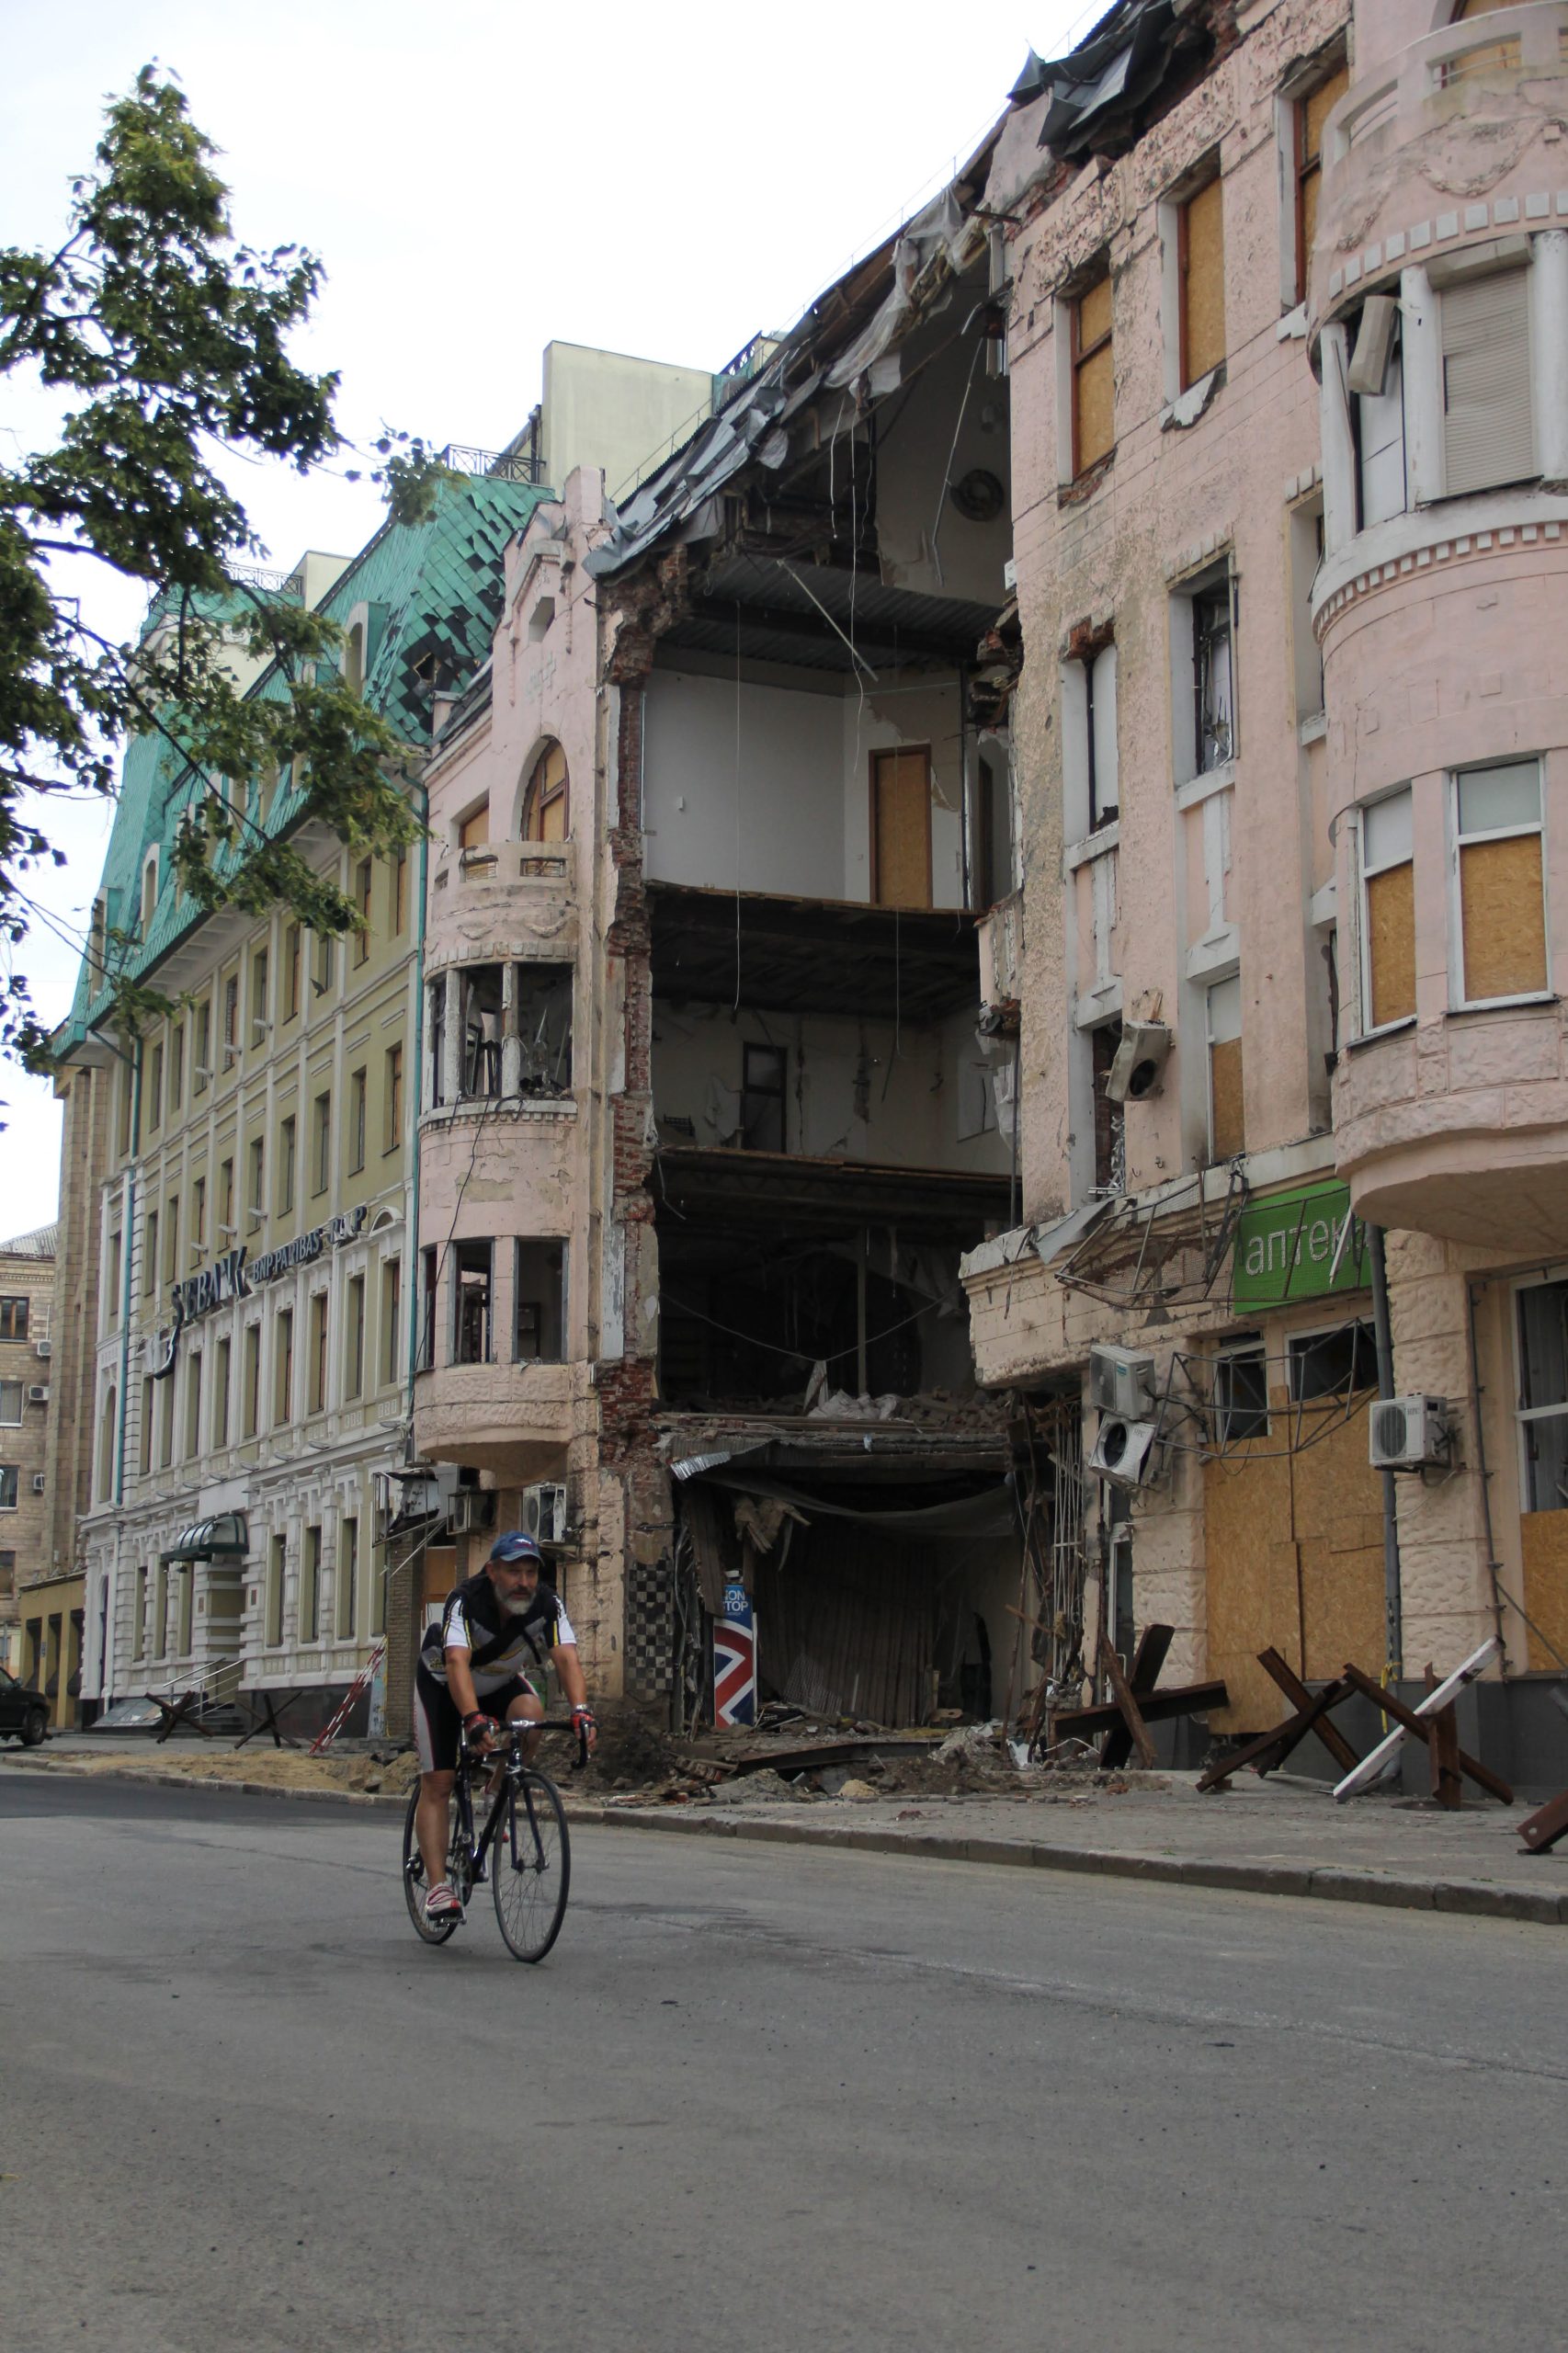 Kharkiv. An apartment building partially destroyed by the Russian rocket in the center of the city. Photo was taken on Aug 16, 2022 by Kateryna Svid.